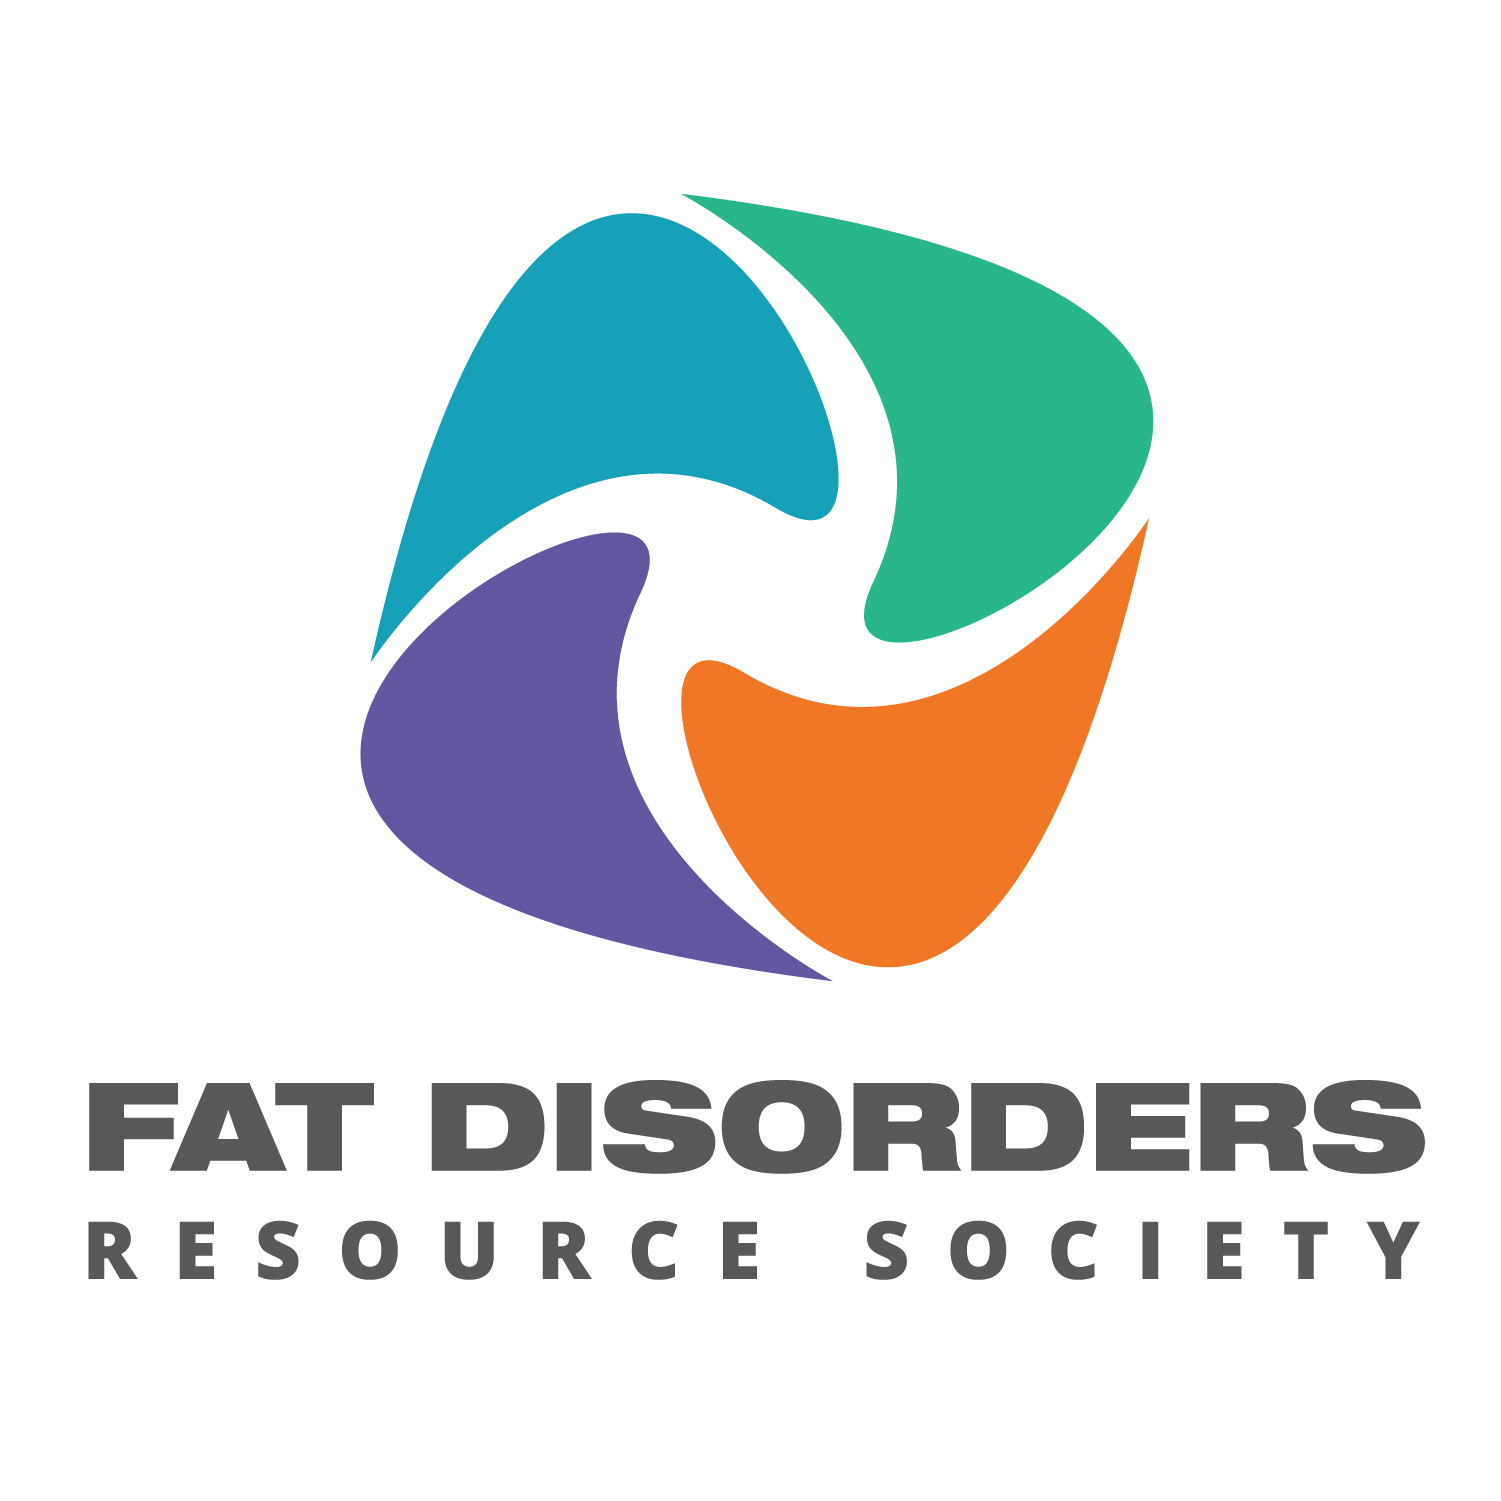 Fat Disorders Resource Society